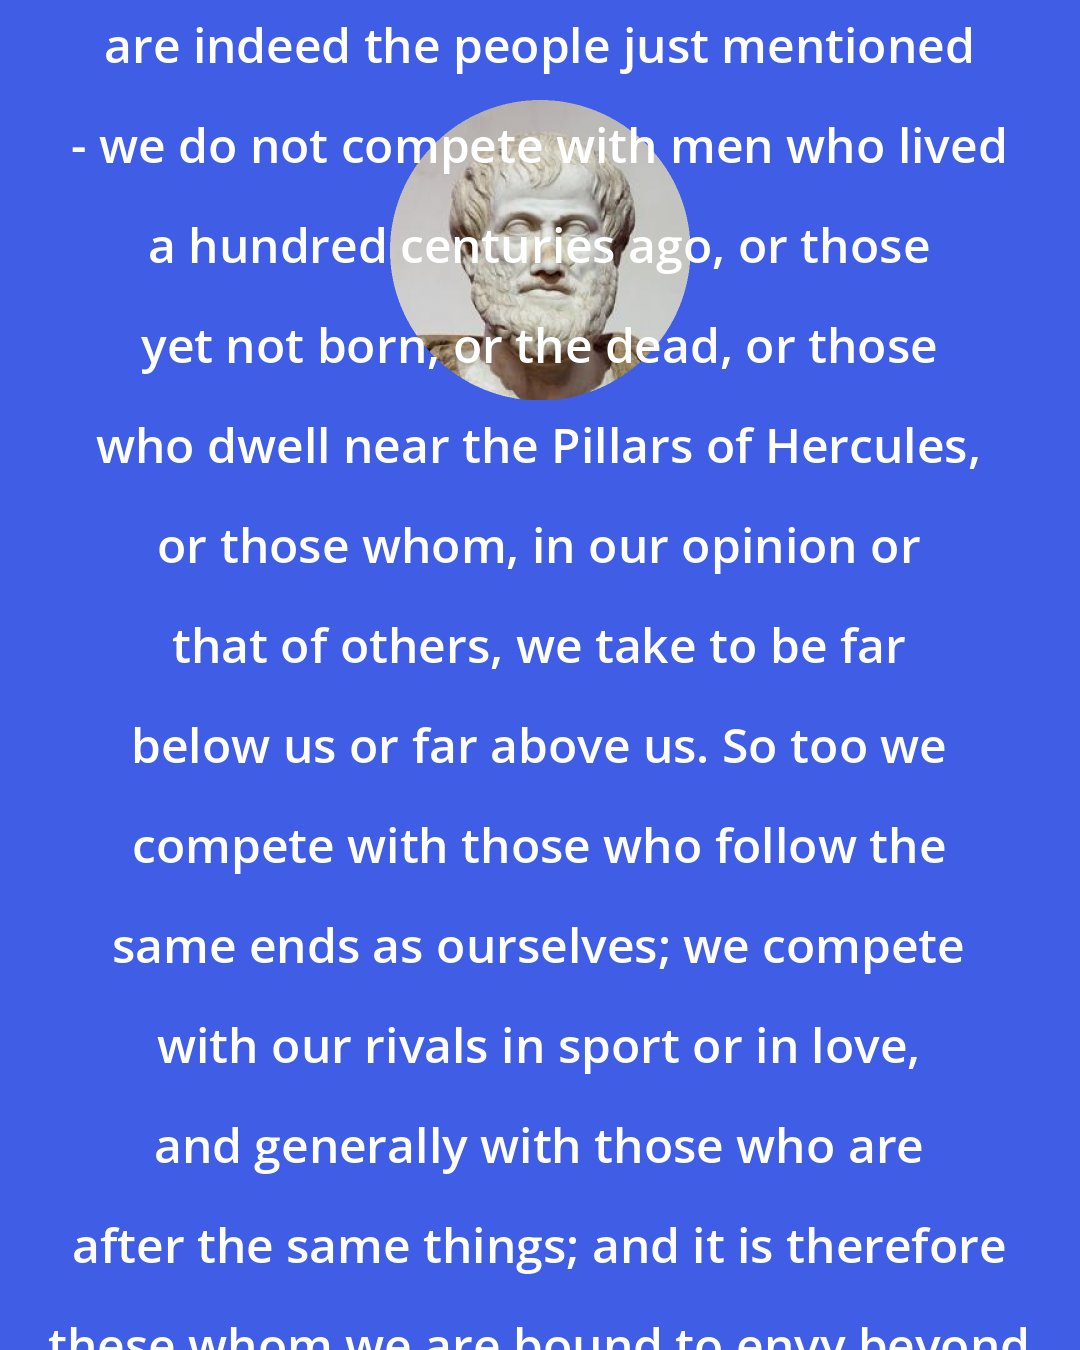 Aristotle: Also our fellow competitors, who are indeed the people just mentioned - we do not compete with men who lived a hundred centuries ago, or those yet not born, or the dead, or those who dwell near the Pillars of Hercules, or those whom, in our opinion or that of others, we take to be far below us or far above us. So too we compete with those who follow the same ends as ourselves; we compete with our rivals in sport or in love, and generally with those who are after the same things; and it is therefore these whom we are bound to envy beyond all others. Hence the saying.